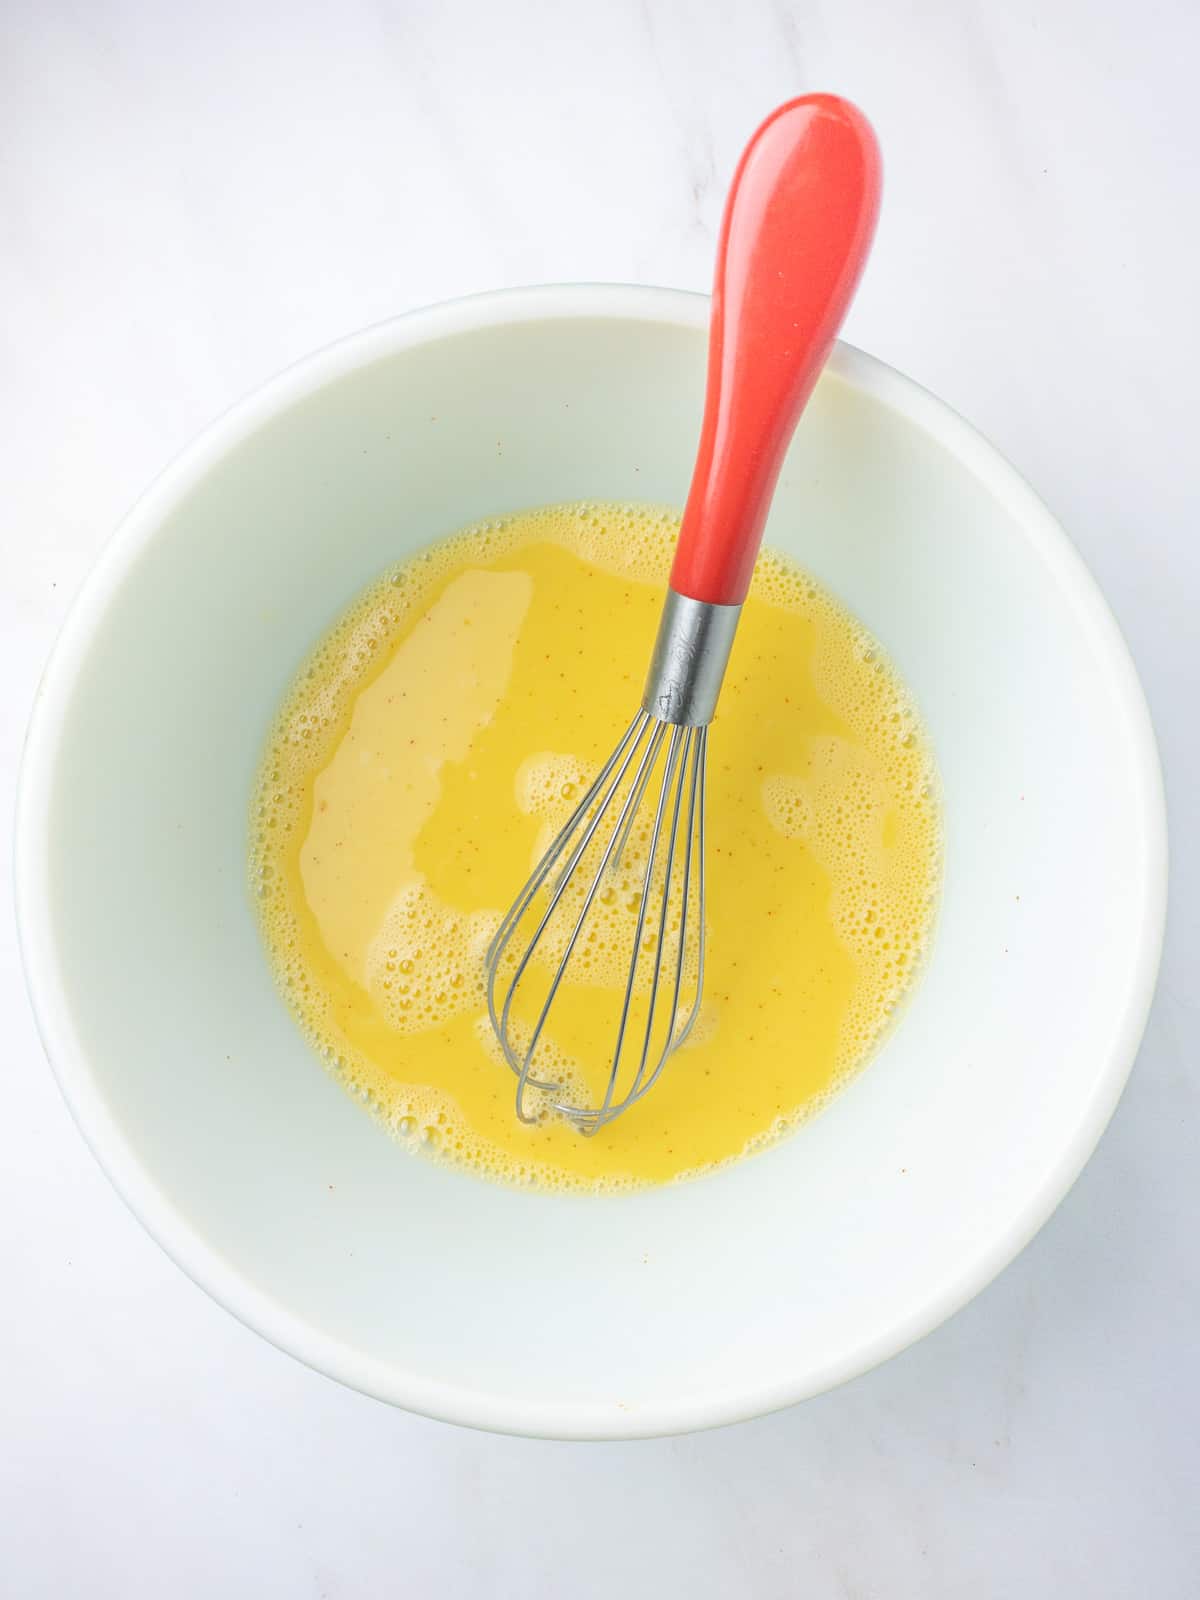 Whisked eggs in a bowl with a red handled whisk.